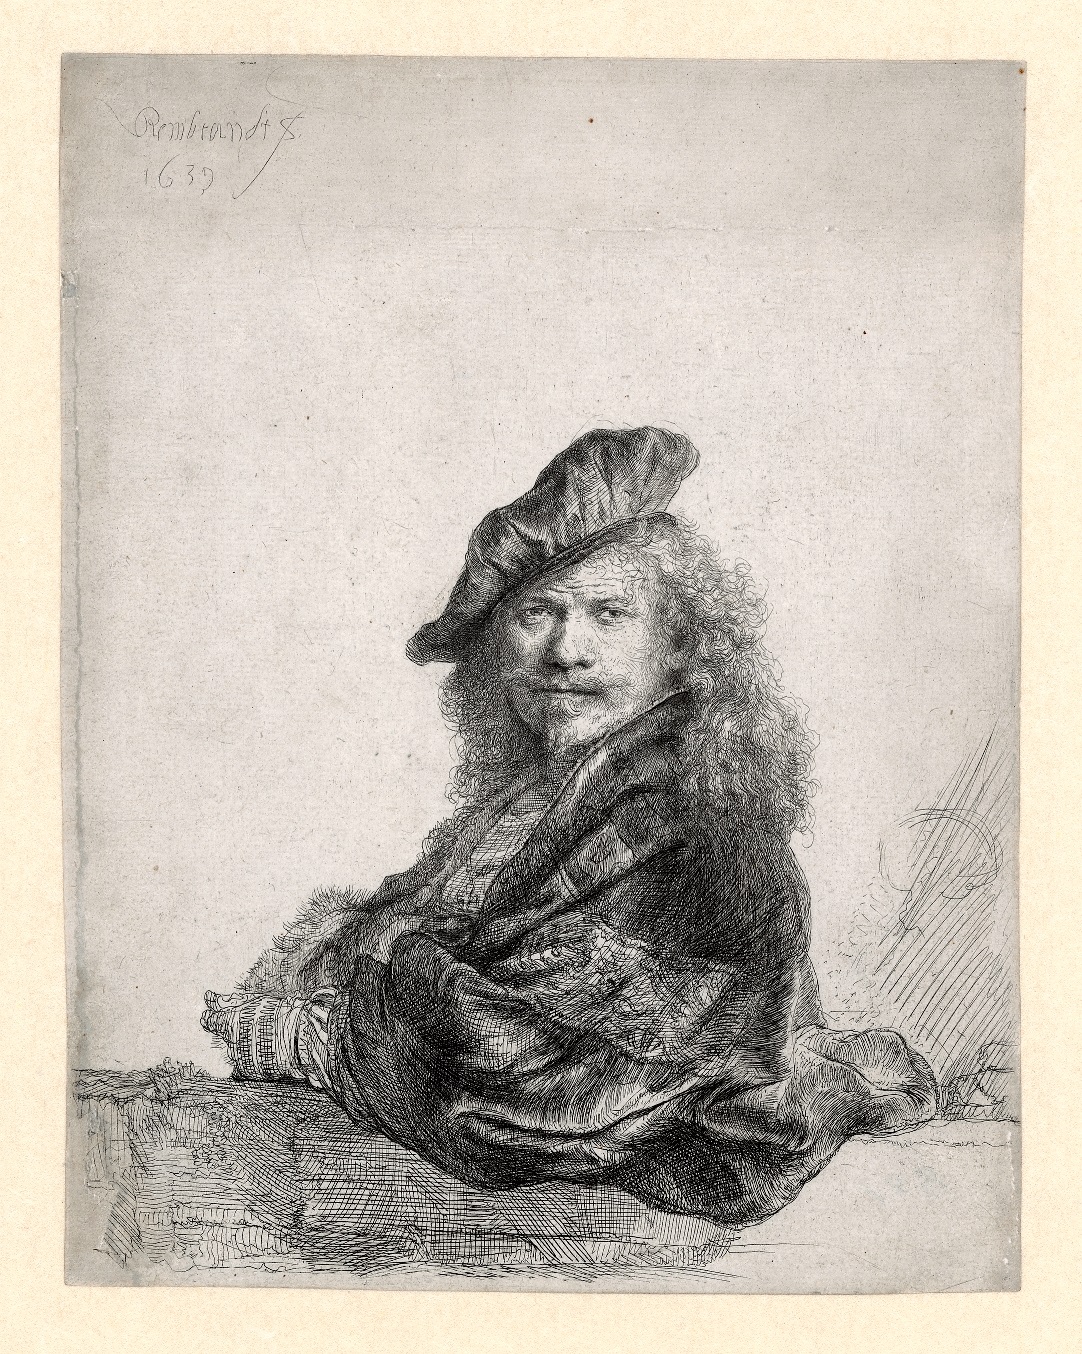 Self-portrait, Leaning on a Stone Sill by Rembrandt van Rijn - 1639 - 205 x 164 mm Rembrandthuis